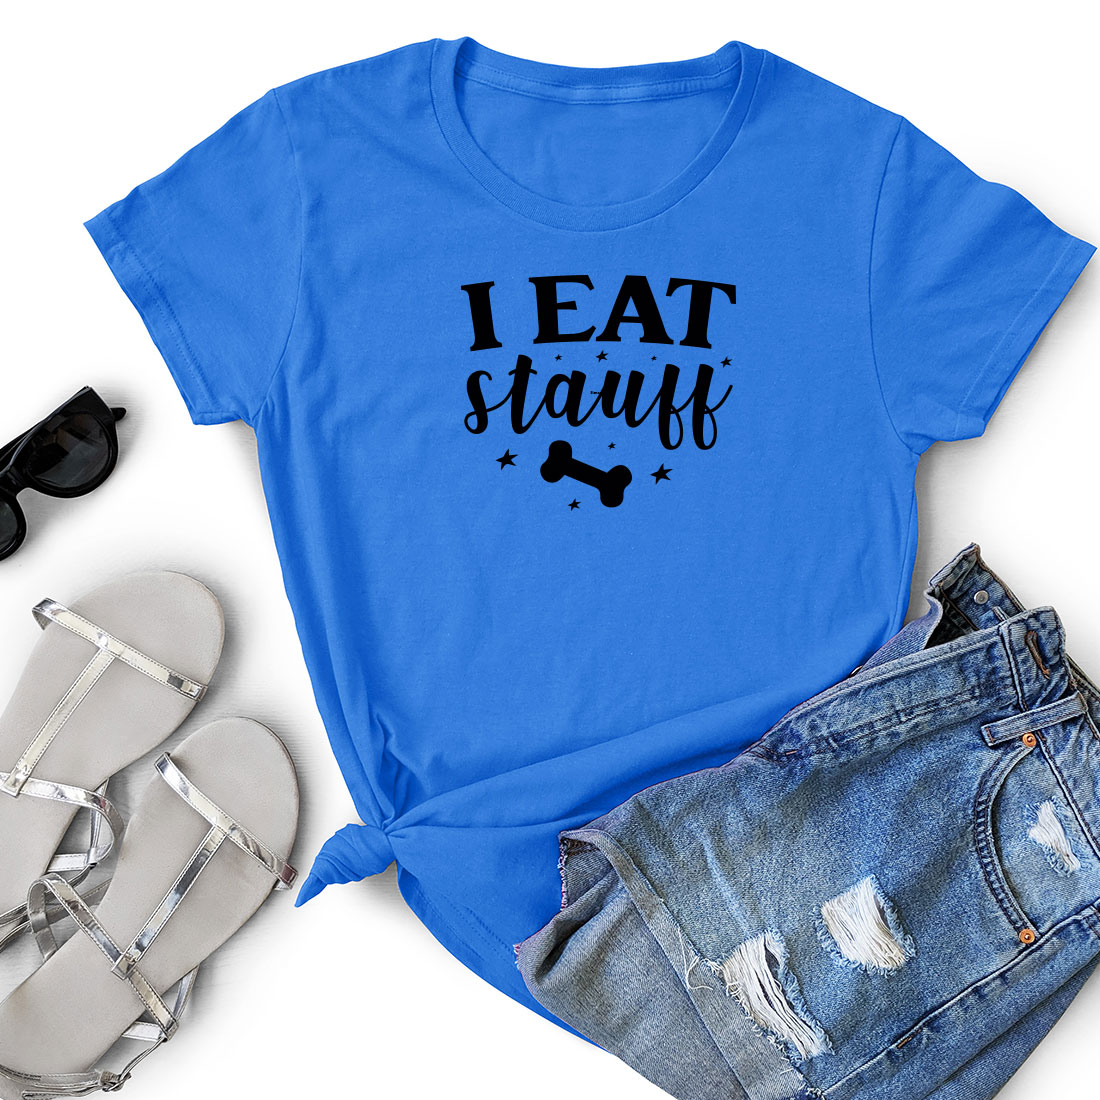 T - shirt that says i eat stuff next to a pair of shorts.